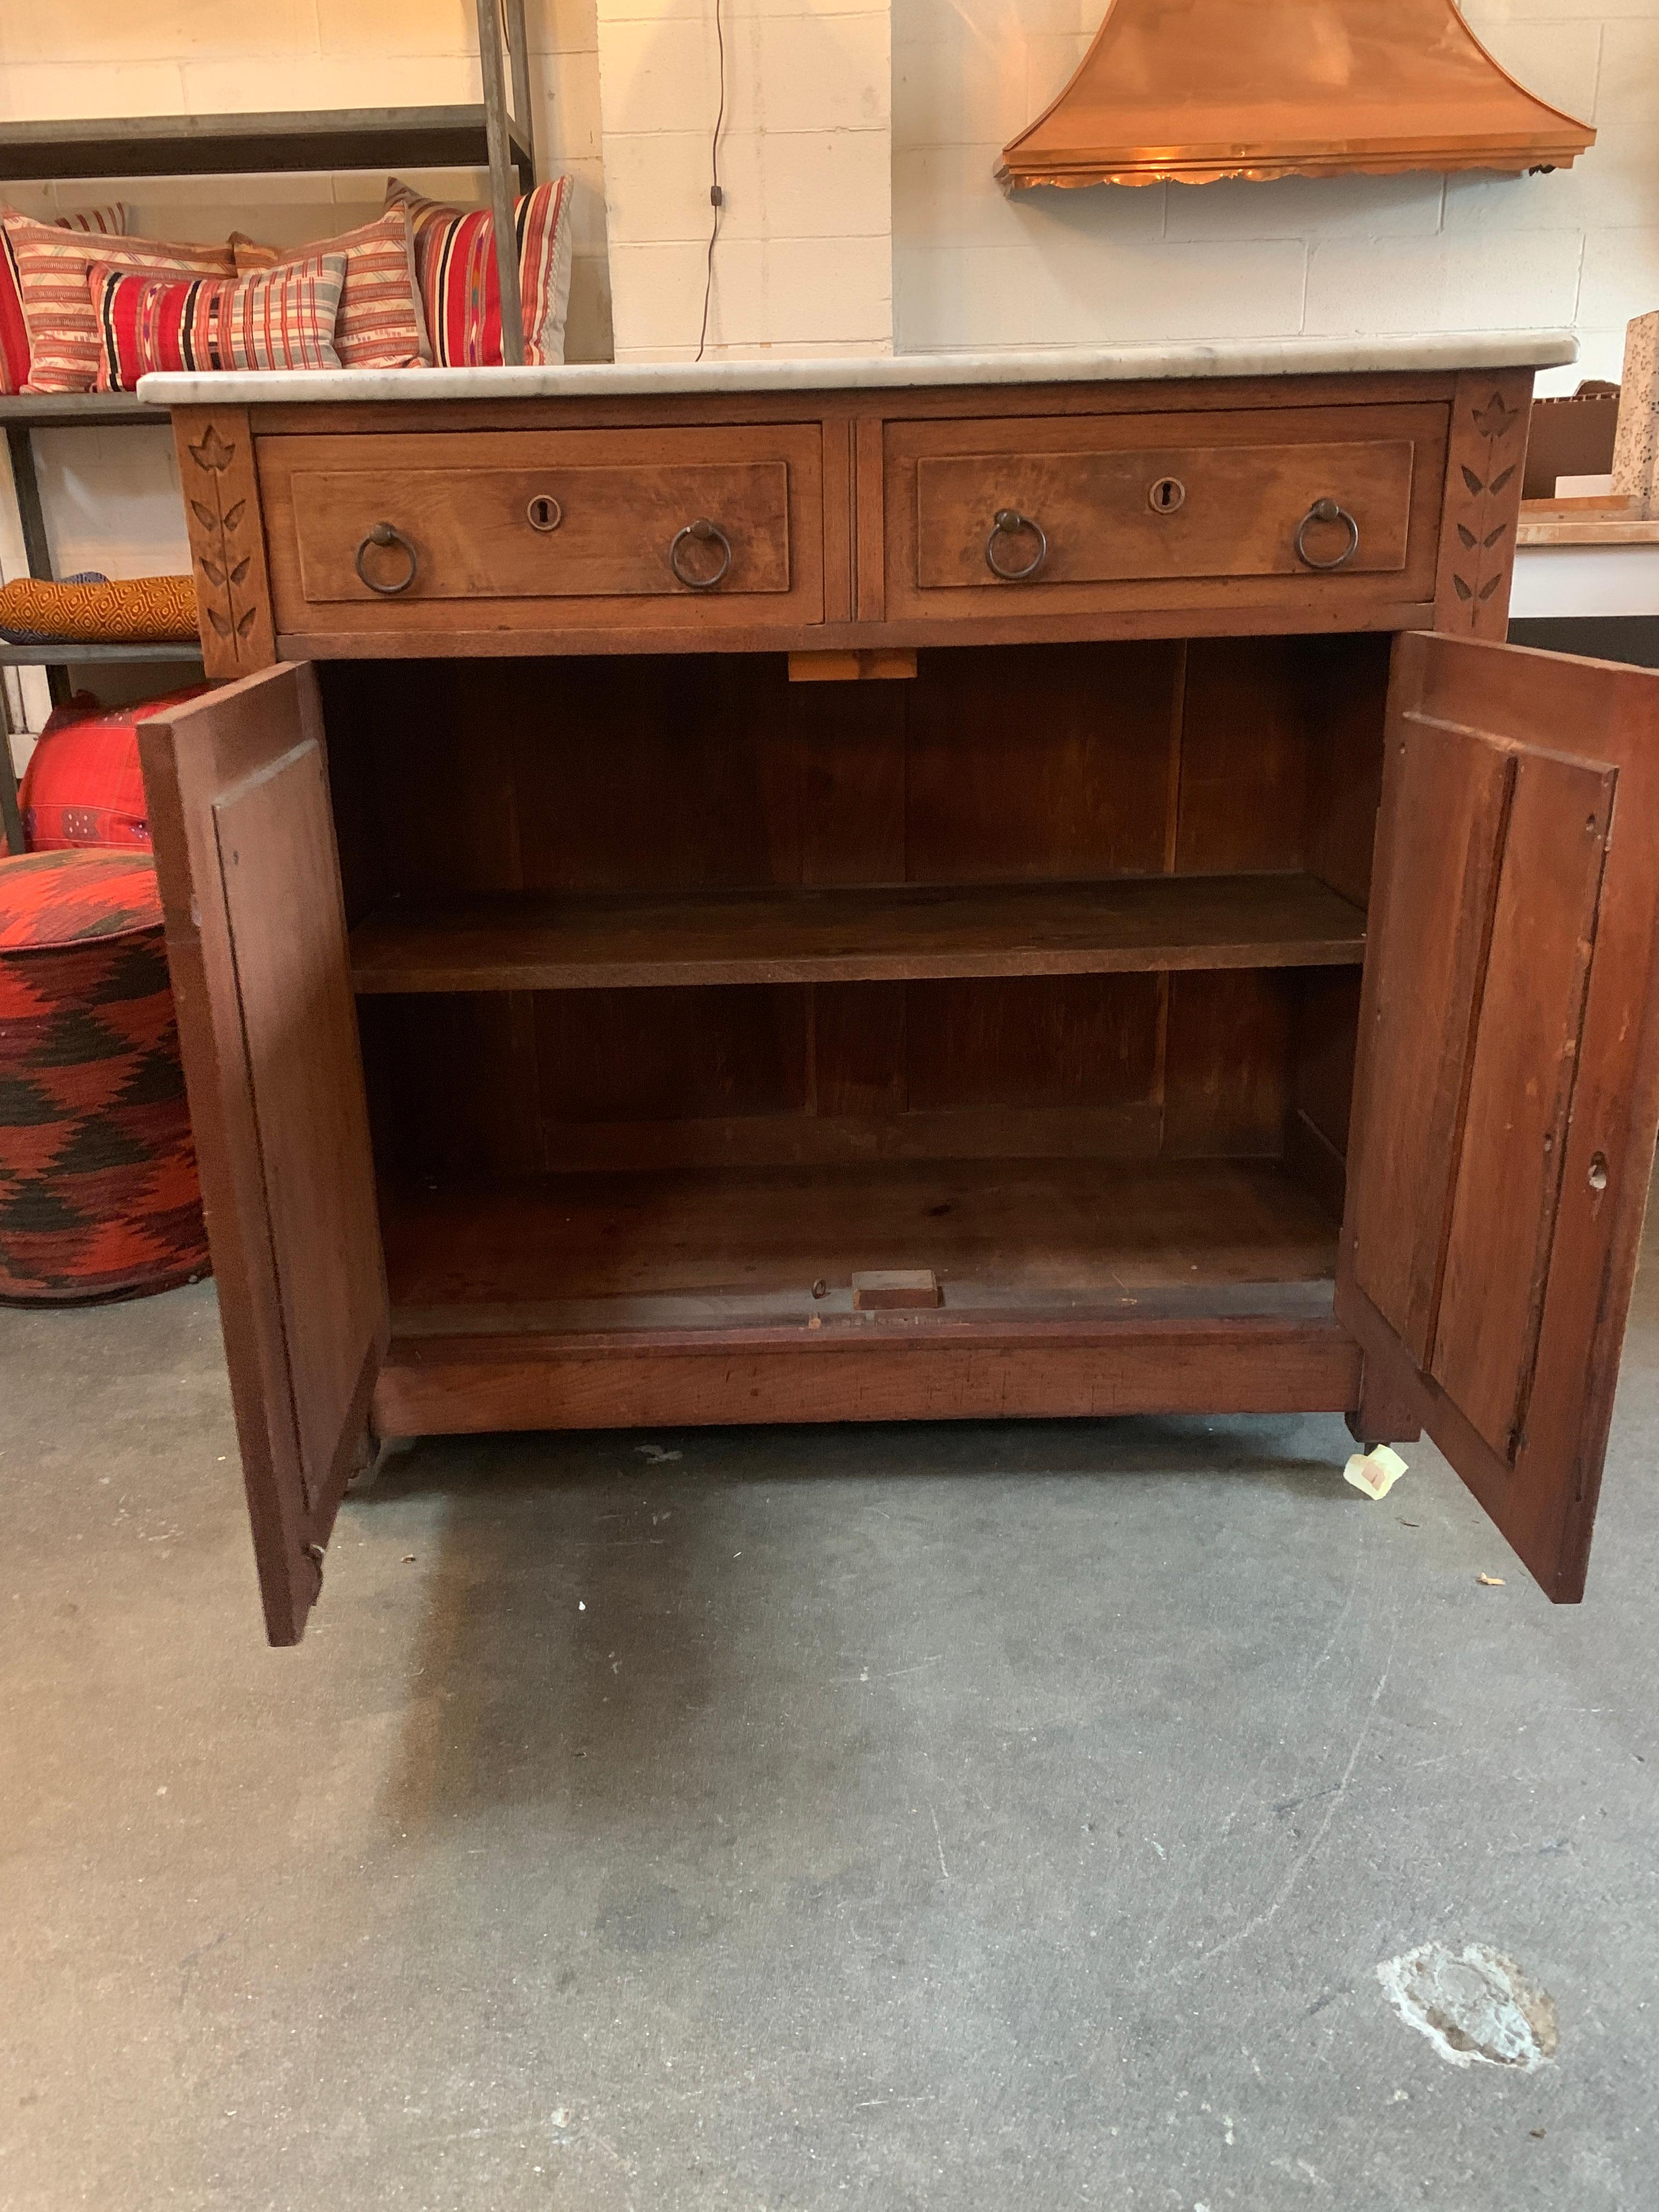 This Victorian walnut sideboard with a marble top is a beautiful piece by itself, but it also has a rich and interesting history. Documented in a type-written note with accompanying newspaper from 1959, this piece was once a part of the Phillips